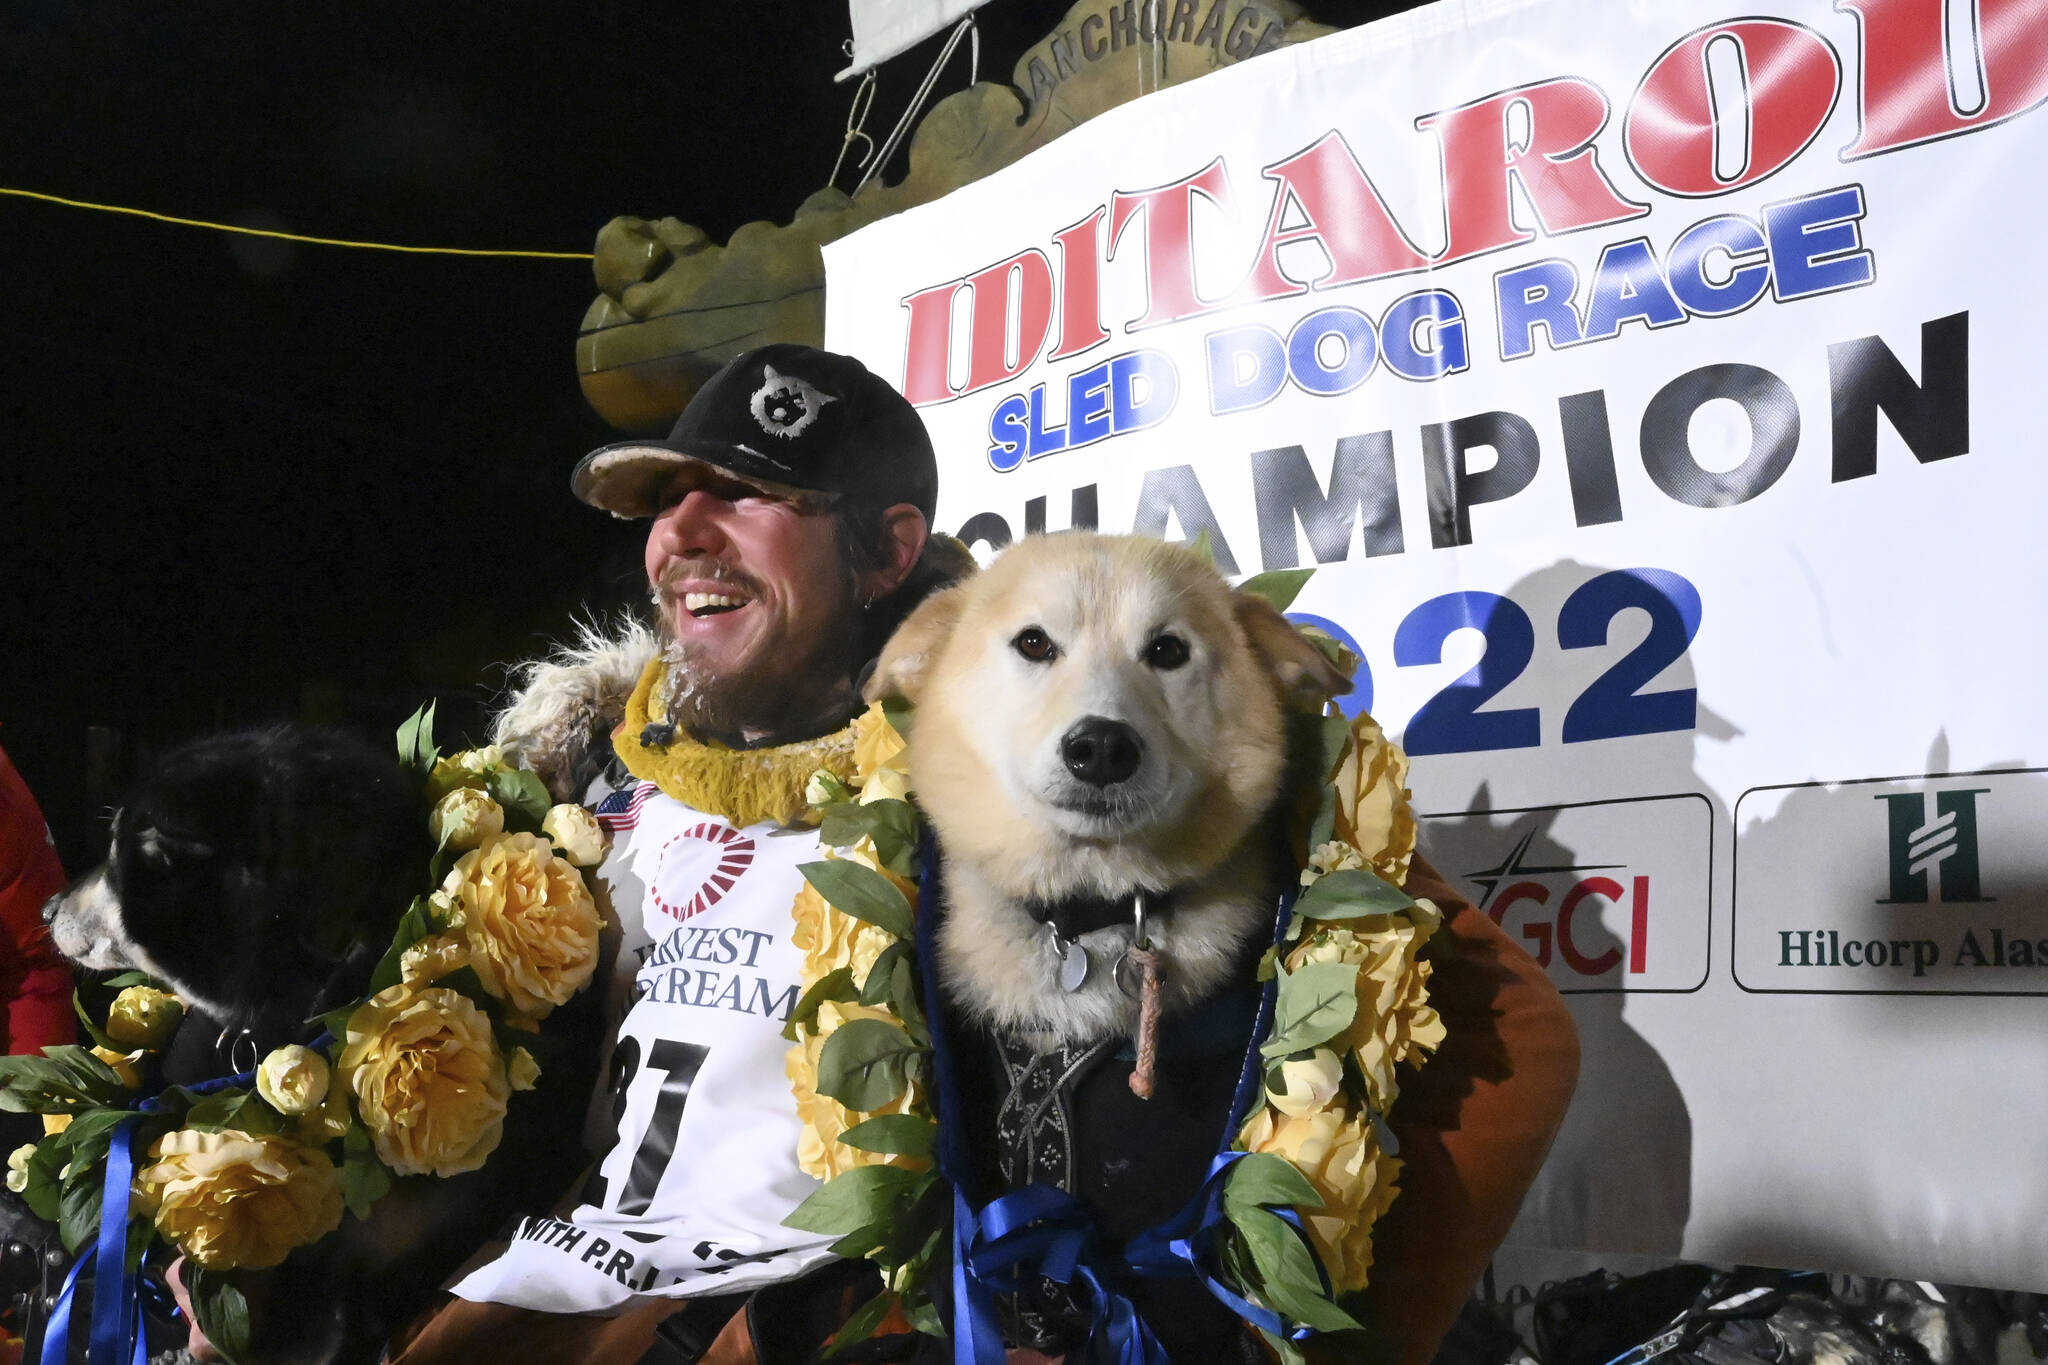 Iditarod winner Brent Sass poses for photos with lead dogs Morello, left, and Slater in the finish chute of the Iditarod Trail Sled Dog Race in Nome, Alaska, Tuesday March 15, 2022. (Anne Raup / Anchorage Daily News)